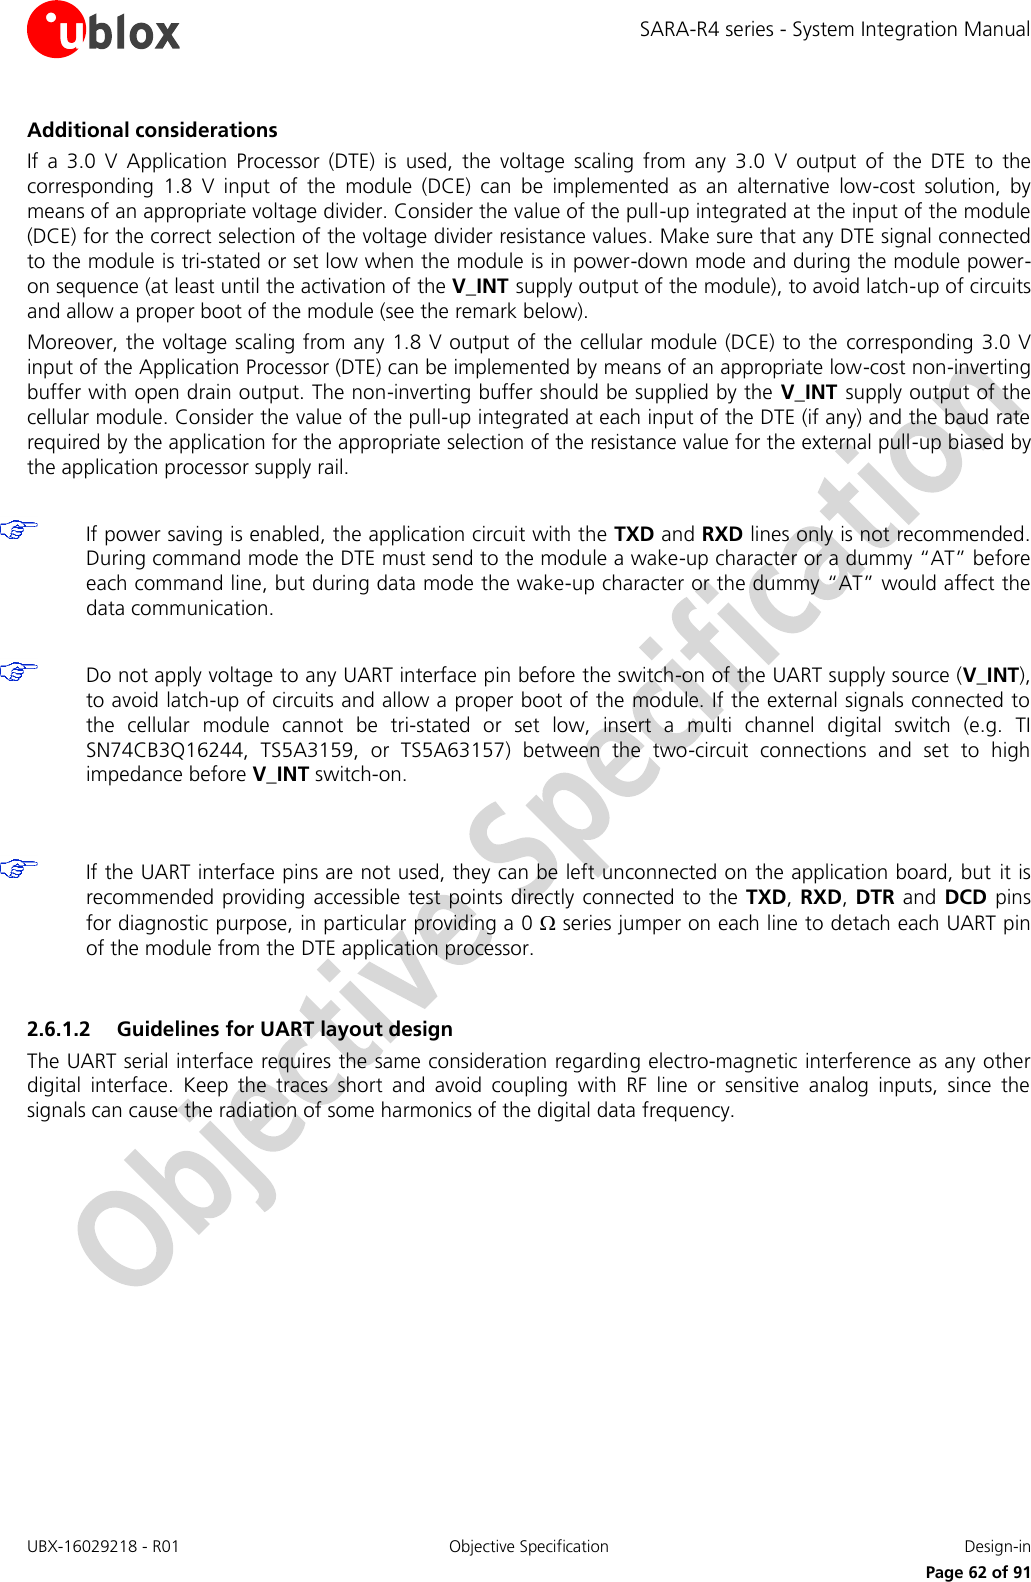 SARA-R4 series - System Integration Manual UBX-16029218 - R01  Objective Specification  Design-in     Page 62 of 91 Additional considerations If  a  3.0  V  Application  Processor  (DTE)  is  used,  the  voltage  scaling  from  any  3.0  V  output  of  the  DTE  to  the corresponding  1.8  V  input  of  the  module  (DCE)  can  be  implemented  as  an  alternative  low-cost  solution,  by means of an appropriate voltage divider. Consider the value of the pull-up integrated at the input of the module (DCE) for the correct selection of the voltage divider resistance values. Make sure that any DTE signal connected to the module is tri-stated or set low when the module is in power-down mode and during the module power-on sequence (at least until the activation of the V_INT supply output of the module), to avoid latch-up of circuits and allow a proper boot of the module (see the remark below).  Moreover, the voltage scaling from any 1.8 V output of the cellular module (DCE) to the  corresponding  3.0 V input of the Application Processor (DTE) can be implemented by means of an appropriate low-cost non-inverting buffer with open drain output. The non-inverting buffer should be supplied by the V_INT  supply output of the cellular module. Consider the value of the pull-up integrated at each input of the DTE (if any) and the baud rate required by the application for the appropriate selection of the resistance value for the external pull-up biased by the application processor supply rail.   If power saving is enabled, the application circuit with the TXD and RXD lines only is not recommended. During command mode the DTE must send to the module a wake-up character or a dummy “AT” before each command line, but during data mode the wake-up character or the dummy “AT” would affect the data communication.   Do not apply voltage to any UART interface pin before the switch-on of the UART supply source (V_INT), to avoid latch-up of circuits and allow a proper boot of the module. If the external signals connected to the  cellular  module  cannot  be  tri-stated  or  set  low,  insert  a  multi  channel  digital  switch  (e.g.  TI SN74CB3Q16244,  TS5A3159,  or  TS5A63157)  between  the  two-circuit  connections  and  set  to  high impedance before V_INT switch-on.    If the UART interface pins are not used, they can be left unconnected on the application board, but  it is recommended providing  accessible test points directly connected  to the  TXD, RXD, DTR and DCD pins for diagnostic purpose, in particular providing a 0  series jumper on each line to detach each UART pin of the module from the DTE application processor.  2.6.1.2 Guidelines for UART layout design The UART serial interface requires the same consideration regarding electro-magnetic interference as any other digital  interface.  Keep  the  traces  short  and  avoid  coupling  with  RF  line  or  sensitive  analog  inputs,  since  the signals can cause the radiation of some harmonics of the digital data frequency.  